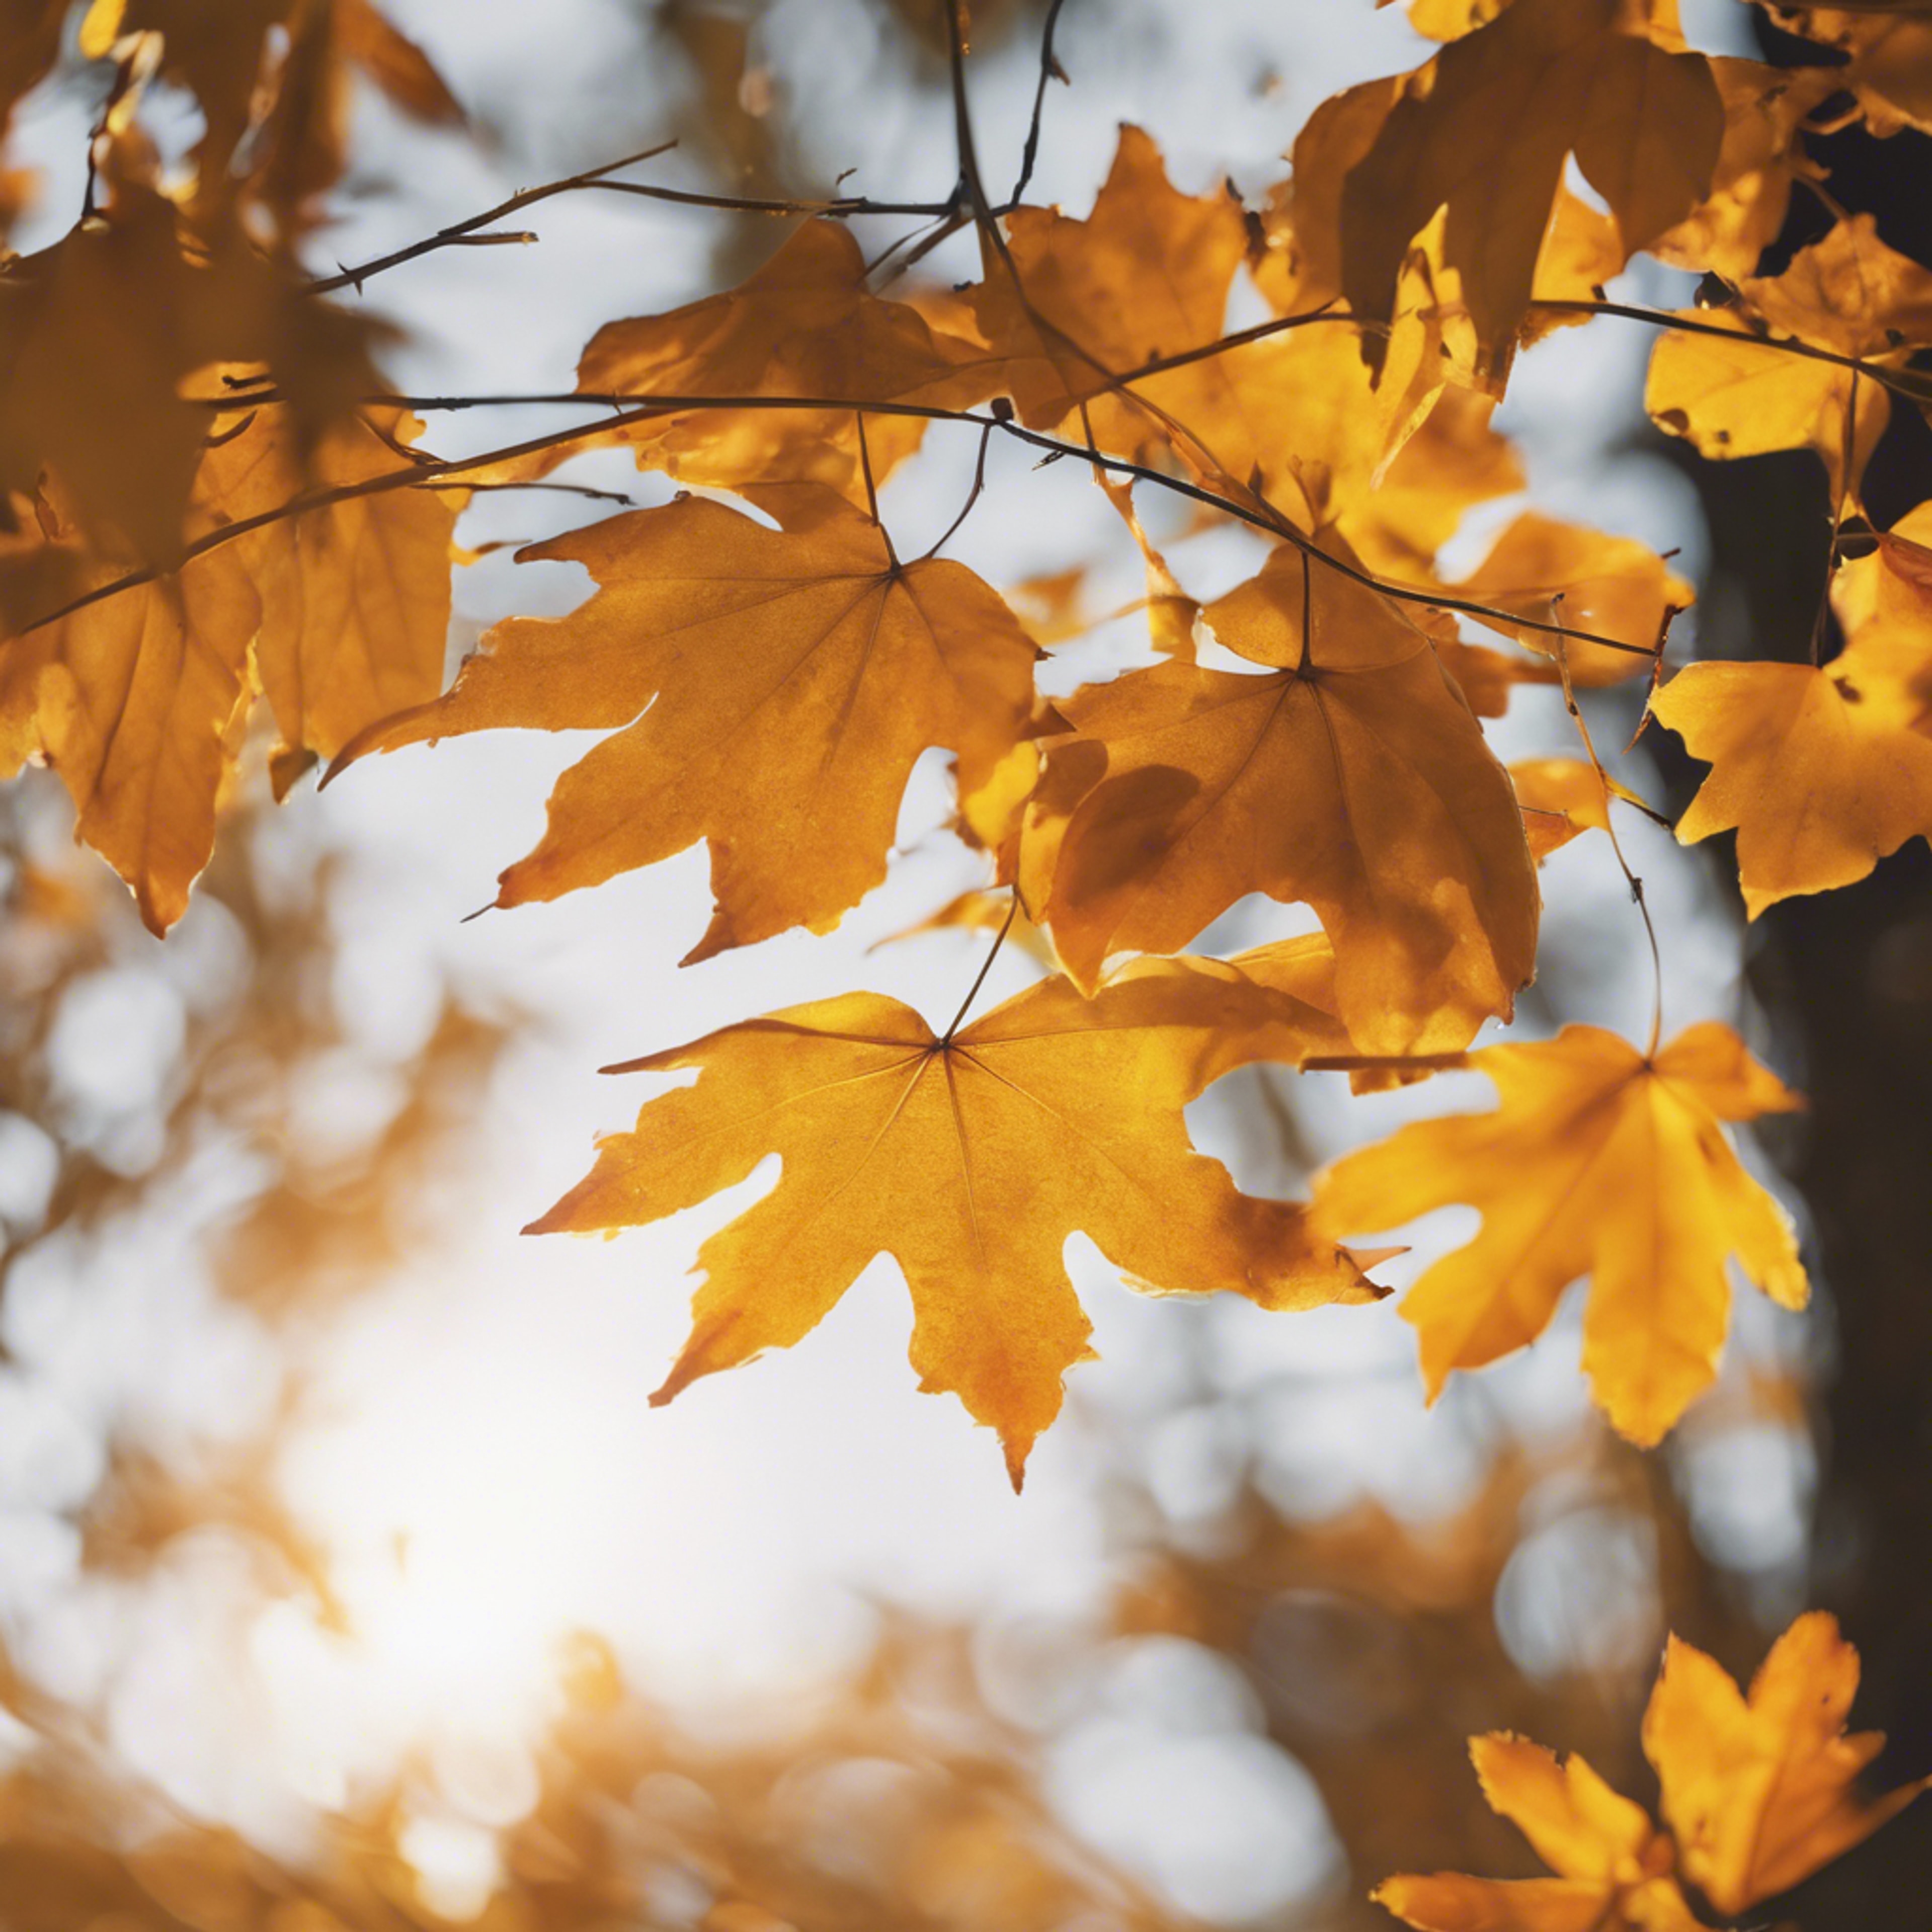 A close look at yellow-orange fall leaves, with the light streaming through. Валлпапер[f7b27726e627433697dc]